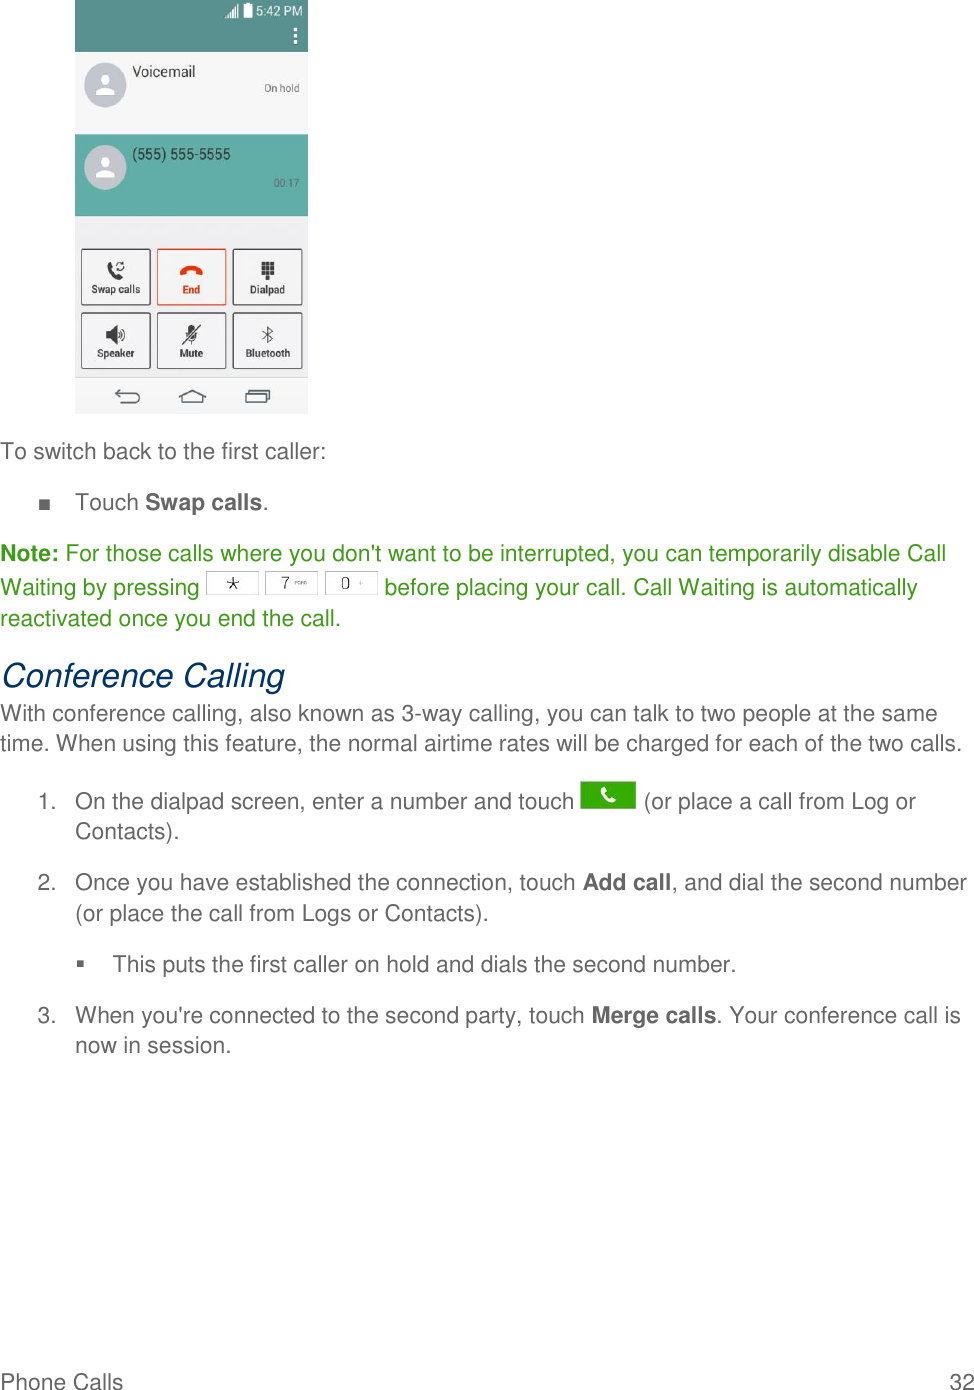 Phone Calls  32   To switch back to the first caller: ■  Touch Swap calls. Note: For those calls where you don&apos;t want to be interrupted, you can temporarily disable Call Waiting by pressing       before placing your call. Call Waiting is automatically reactivated once you end the call. Conference Calling With conference calling, also known as 3-way calling, you can talk to two people at the same time. When using this feature, the normal airtime rates will be charged for each of the two calls. 1.  On the dialpad screen, enter a number and touch   (or place a call from Log or Contacts). 2.  Once you have established the connection, touch Add call, and dial the second number (or place the call from Logs or Contacts).    This puts the first caller on hold and dials the second number. 3.  When you&apos;re connected to the second party, touch Merge calls. Your conference call is now in session. 